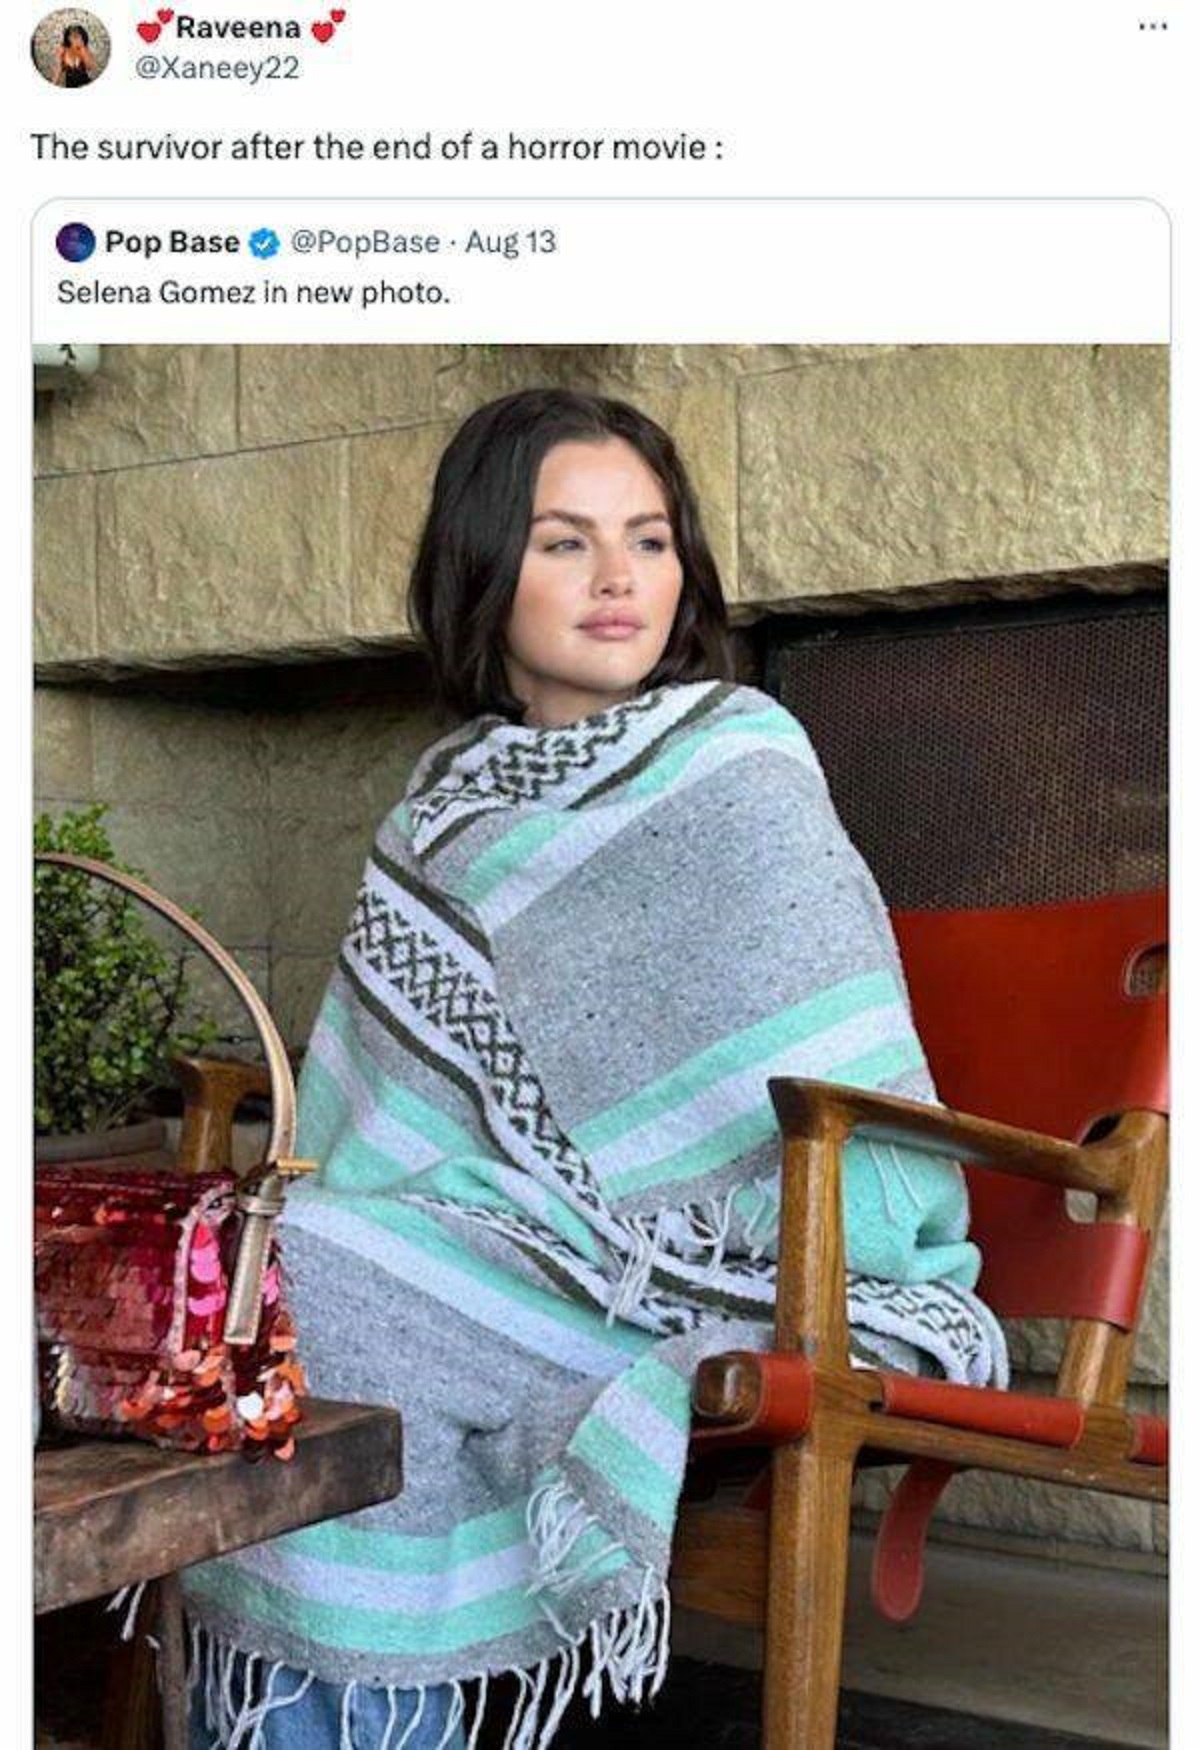 funny tweets - stole - Raveena The survivor after the end of a horror movie Pop BasePopBase Aug 13 Selena Gomez in new photo. X